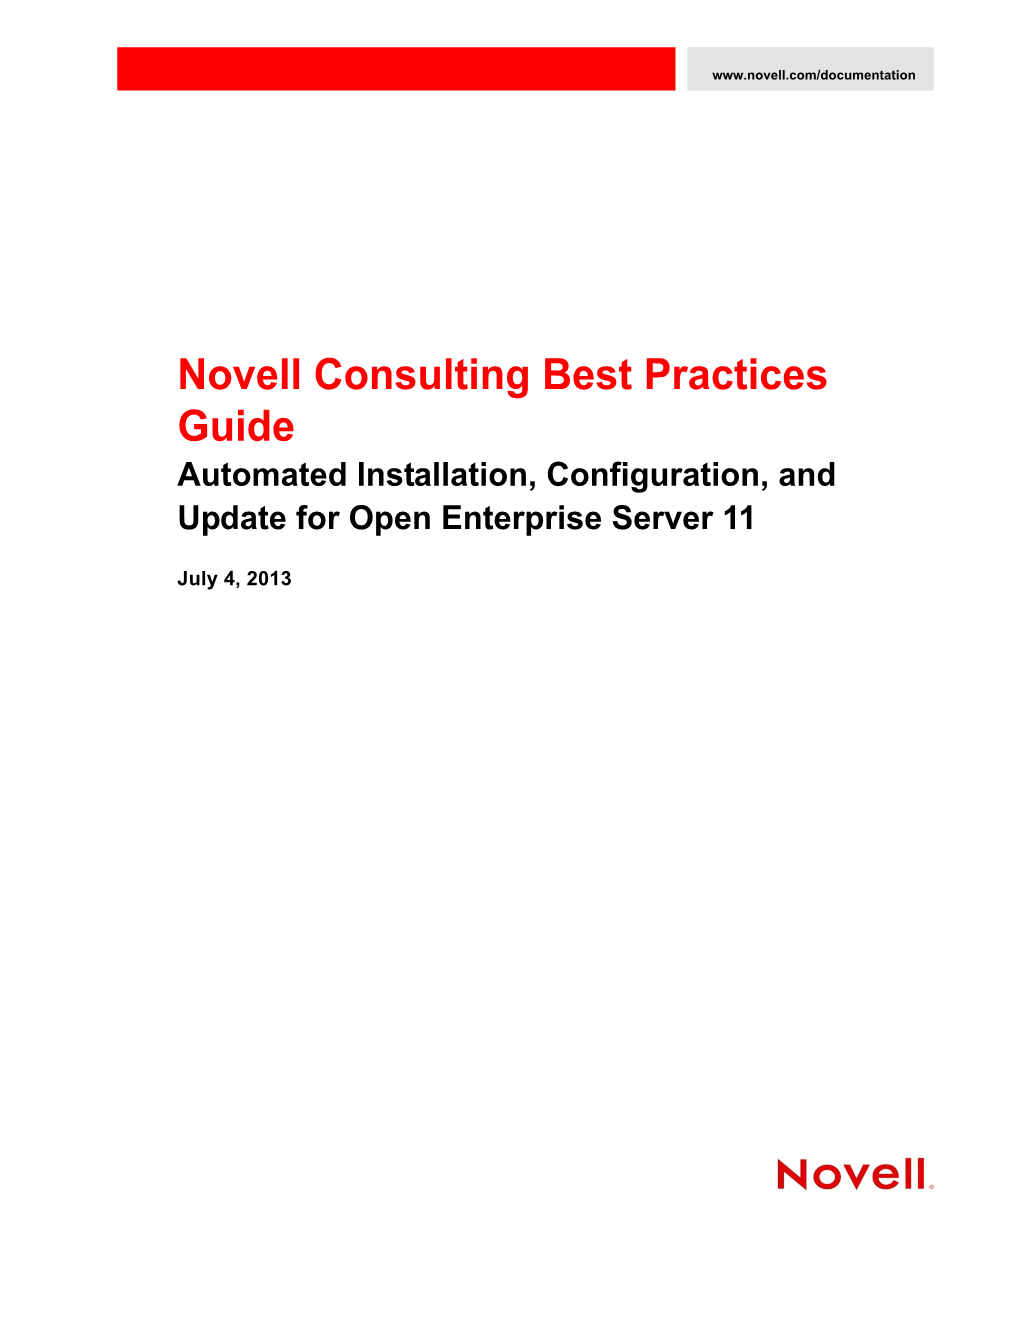 Novell Consulting Best Practices Guide Automated Installation, Configuration, and Update for Open Enterprise Server 11